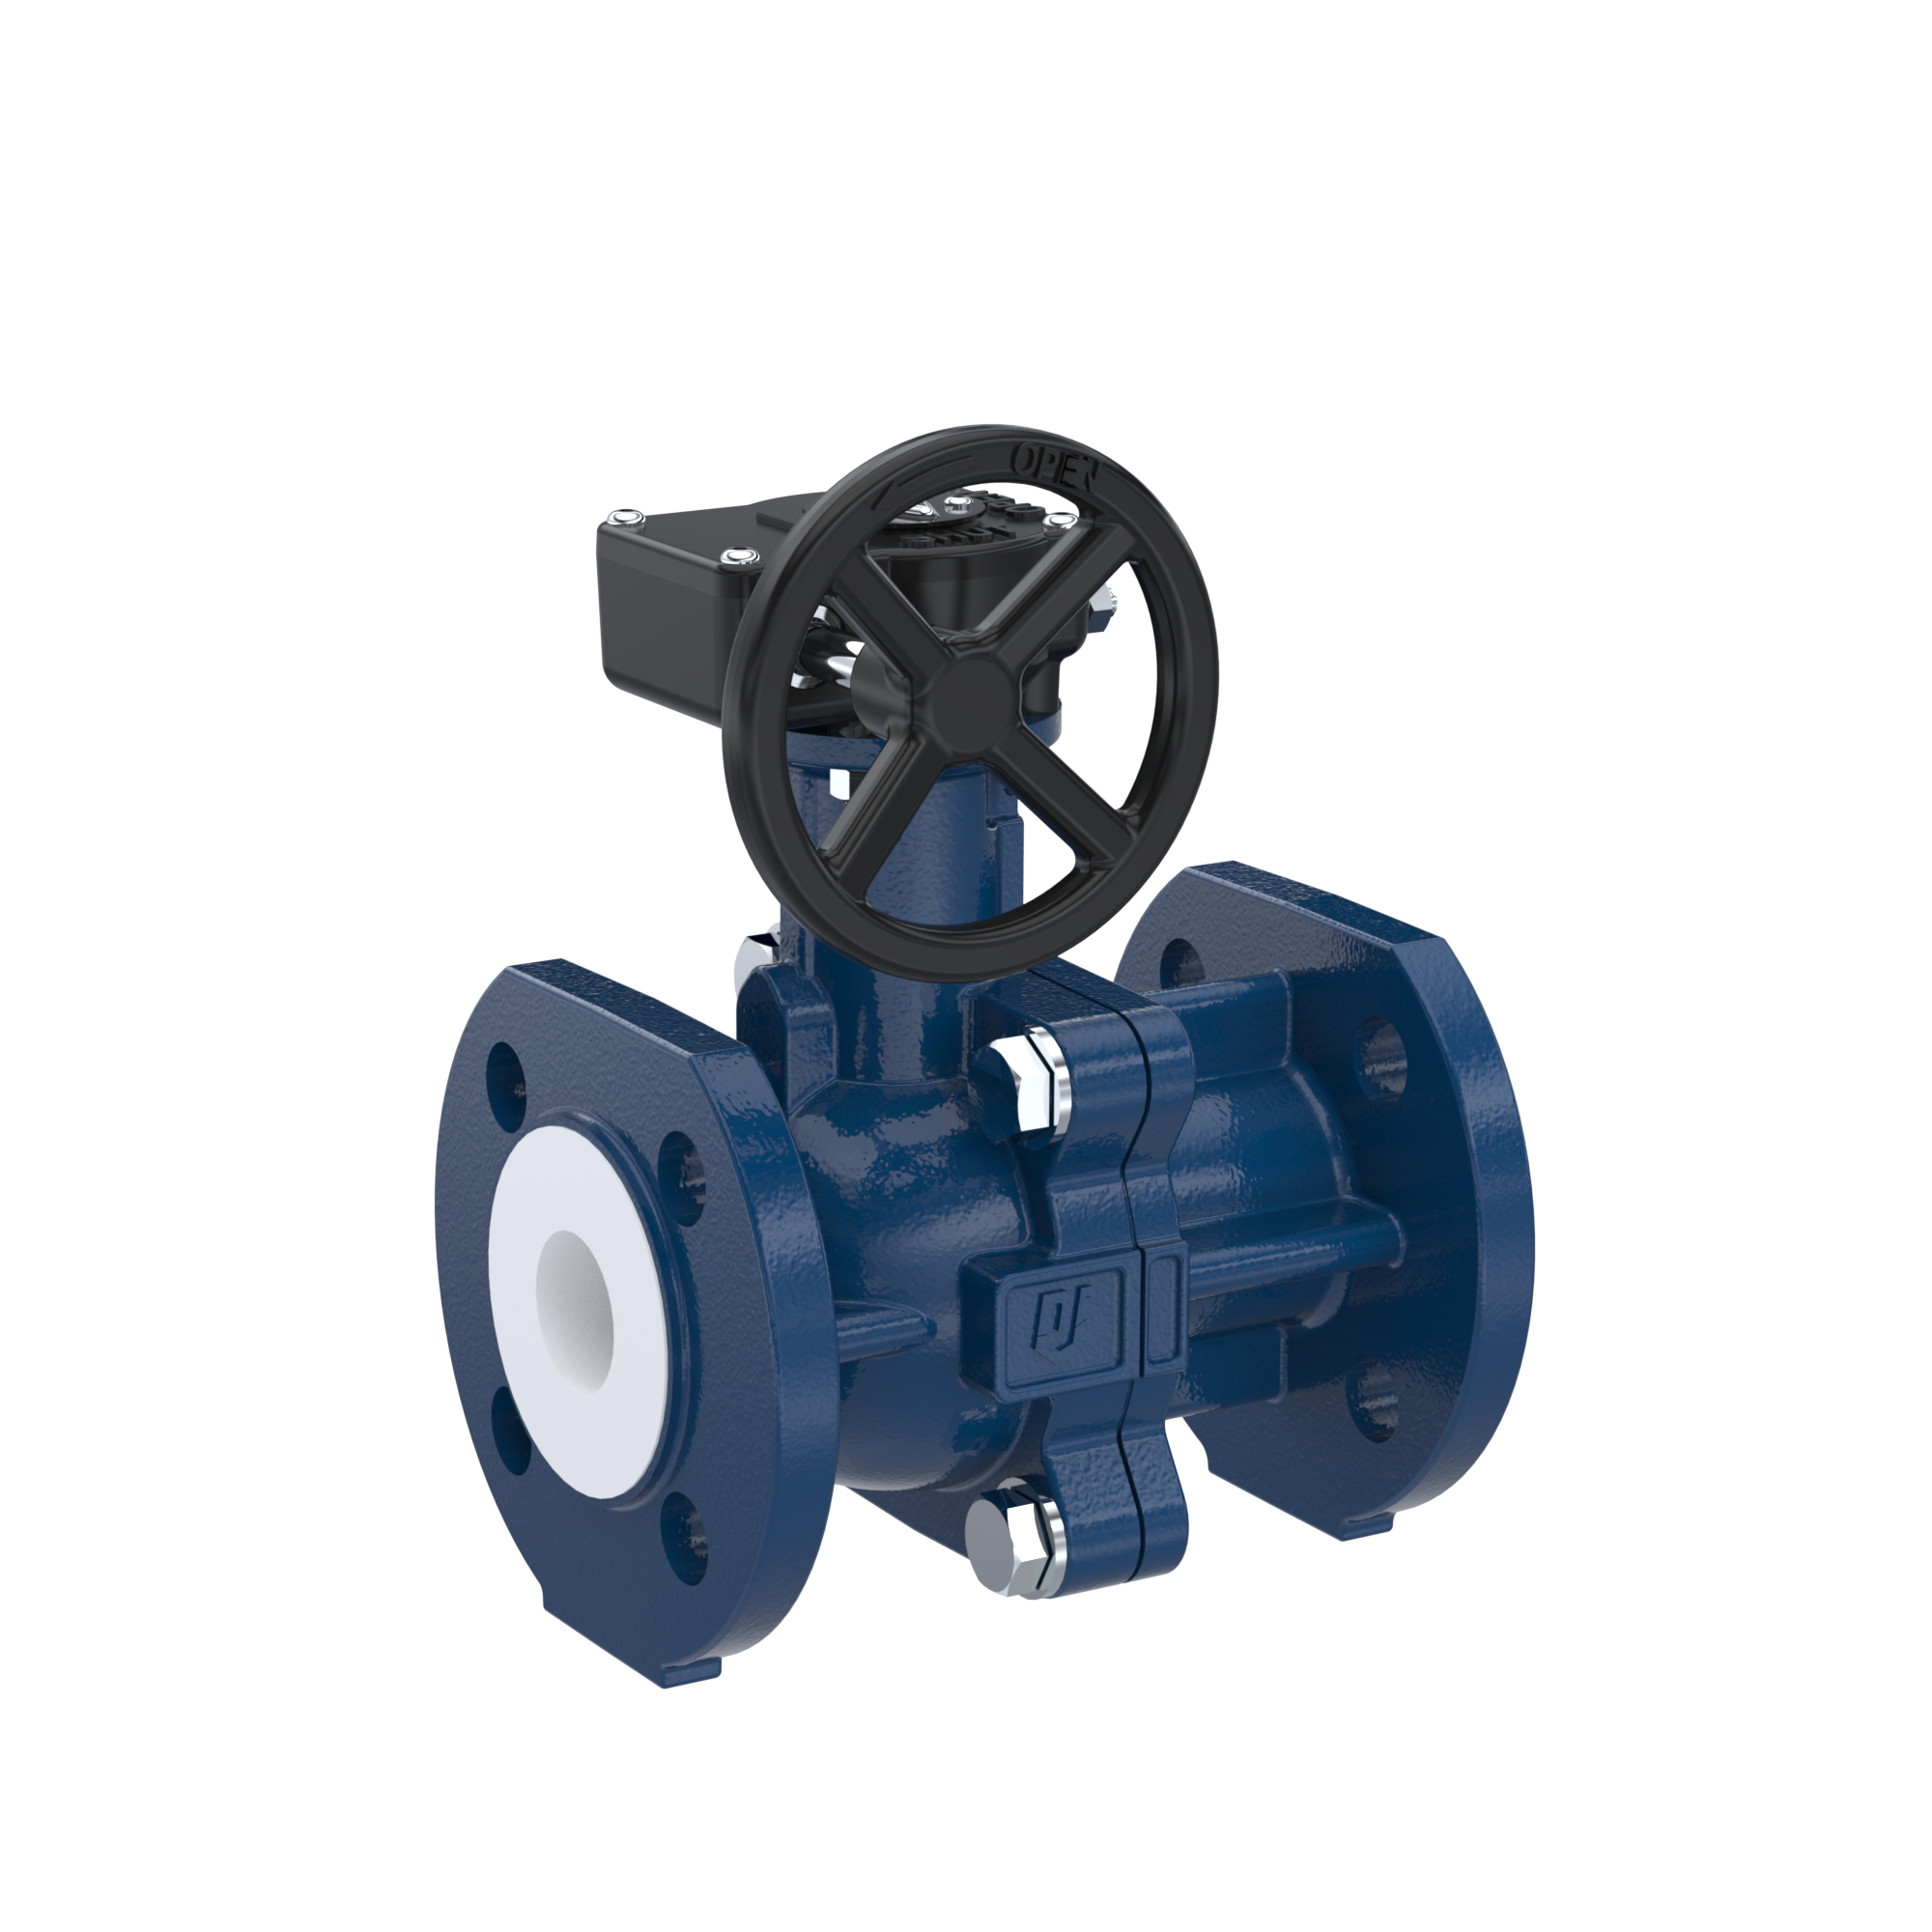 PFA-flange ball valve FK13 DN40 - 1 1/2" inch PN10/16 made of spheroidal graphite cast iron with worm gear